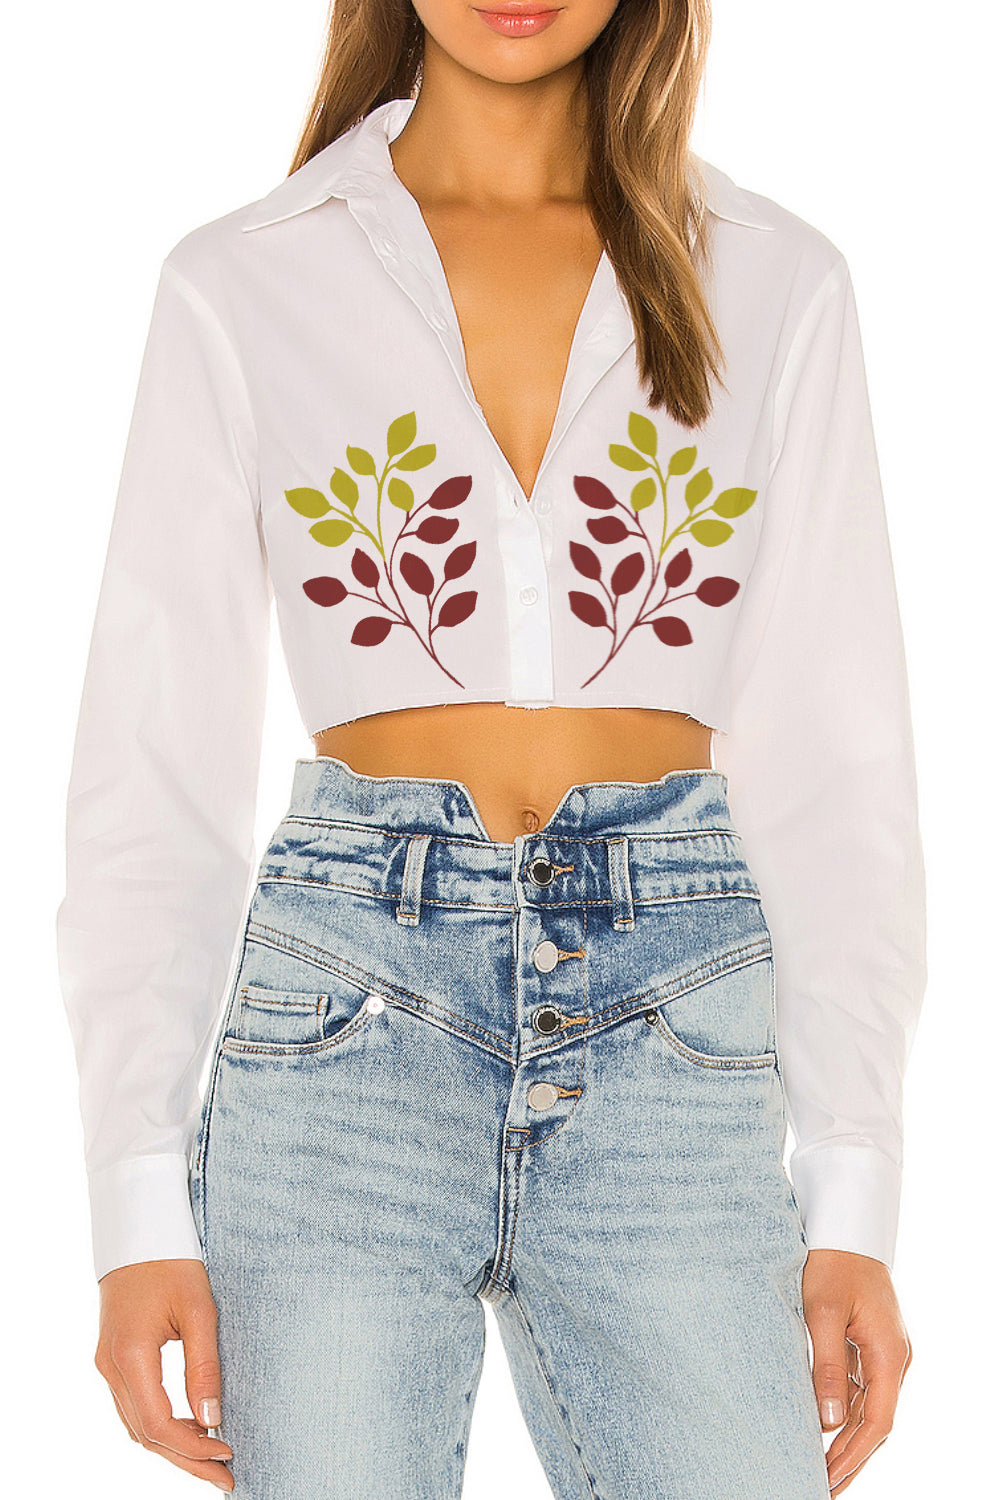 Shirt Crop Top – Styched Fashion